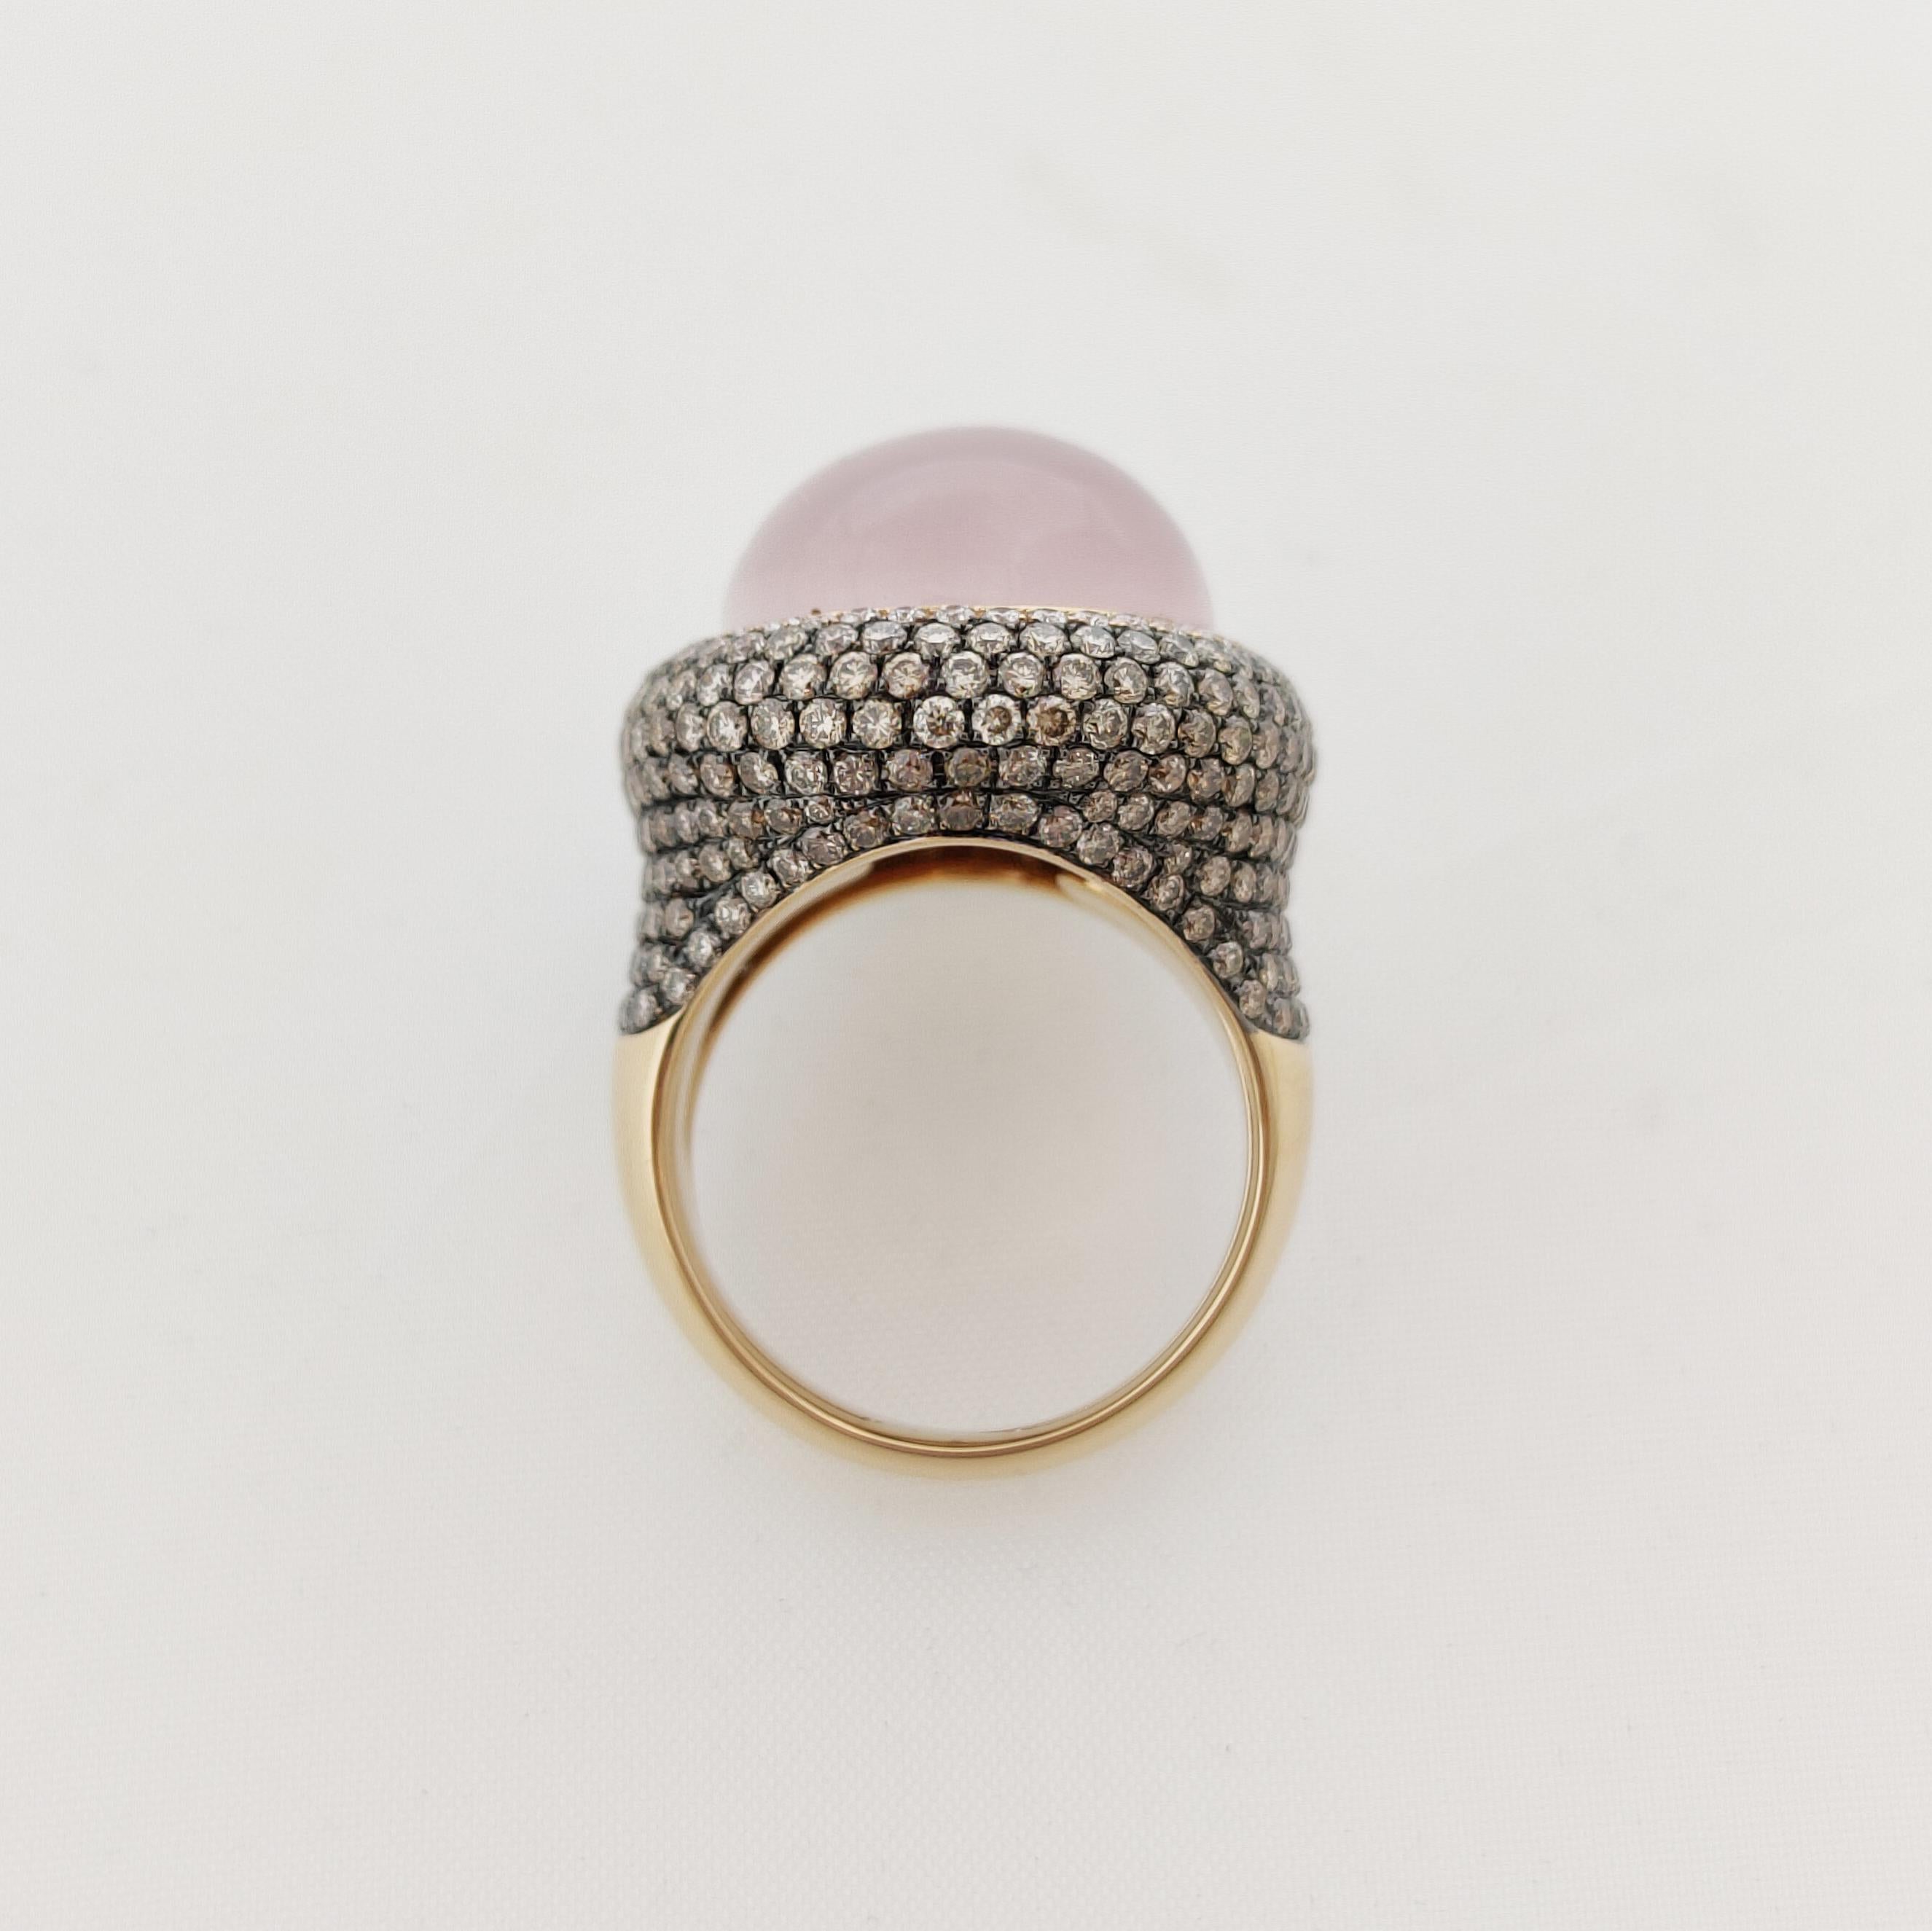 Contemporary Bespoke One-of-a-Kind Cocktail Ring with Rose Quartz and Diamonds For Sale